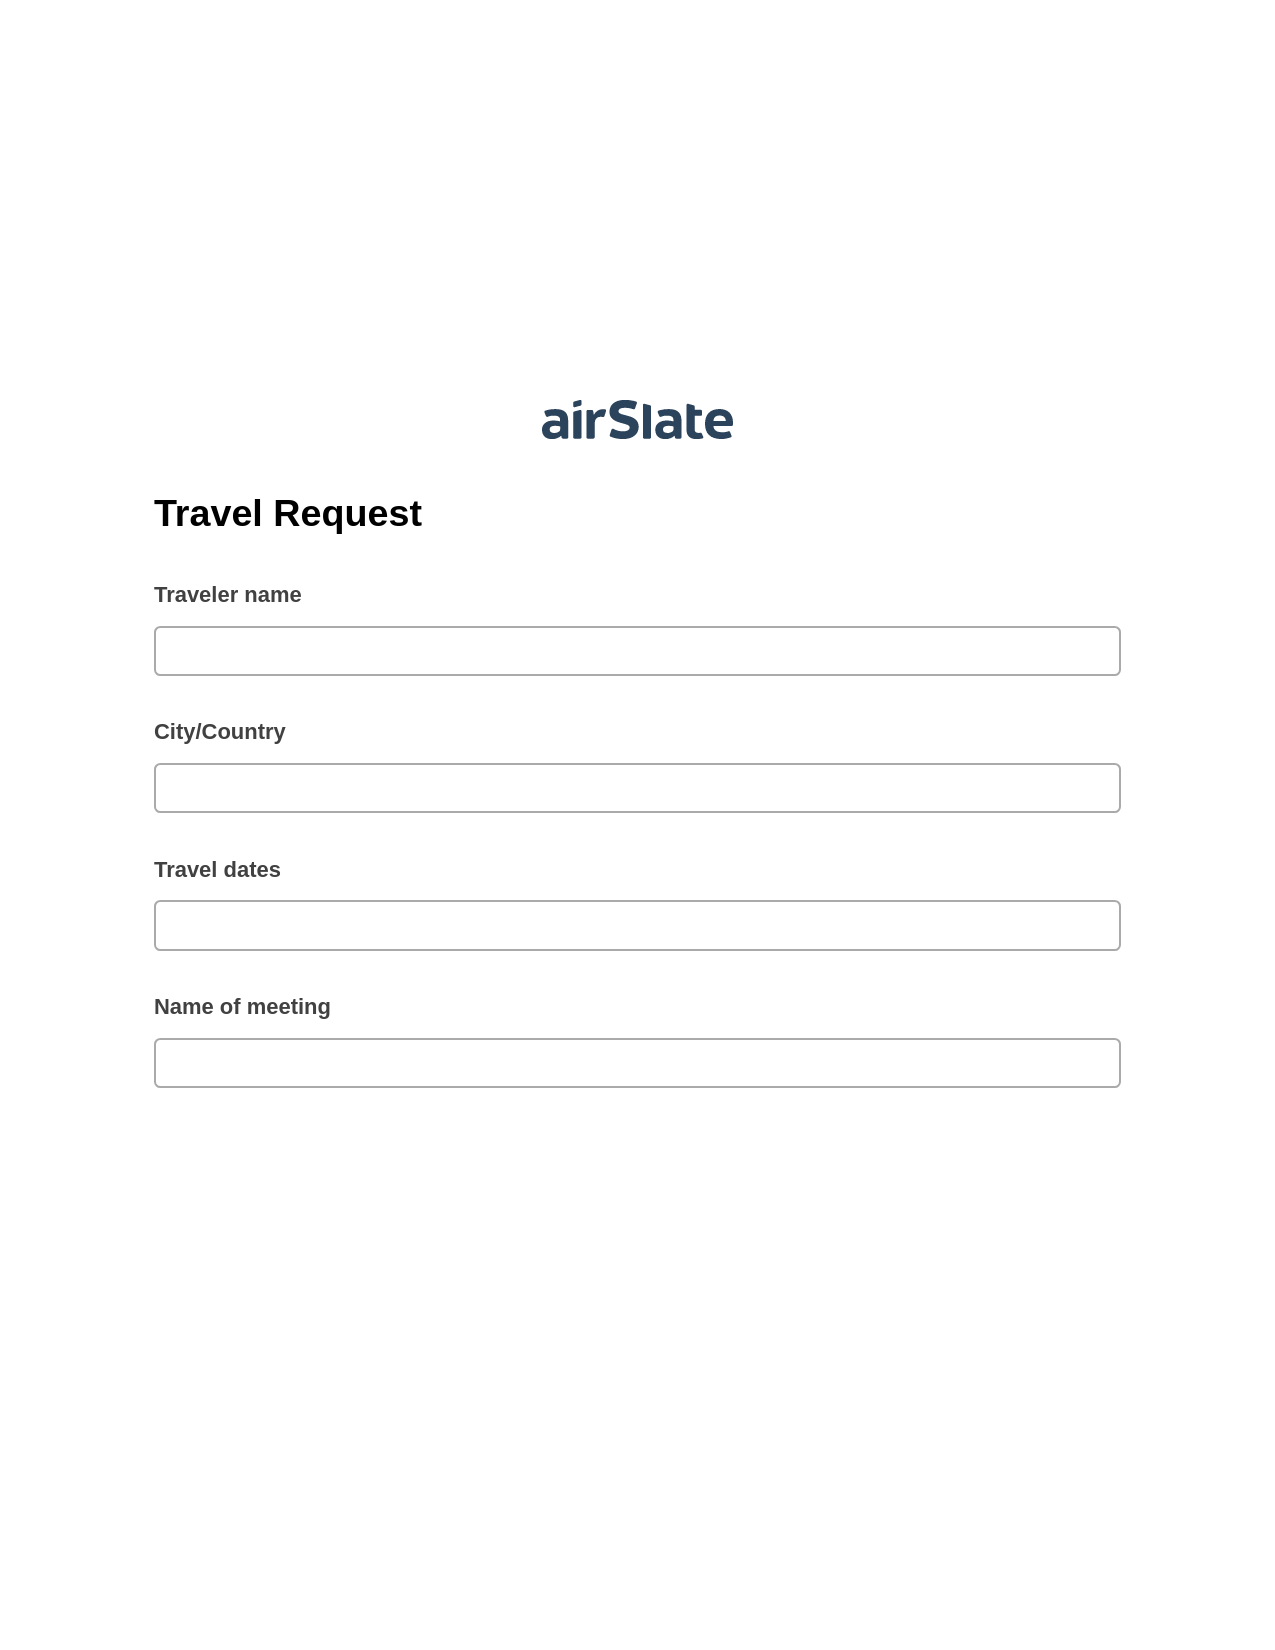 Multirole Travel Request Pre-fill Dropdown from Airtable, Create Slate Reminder Bot, Dropbox Bot